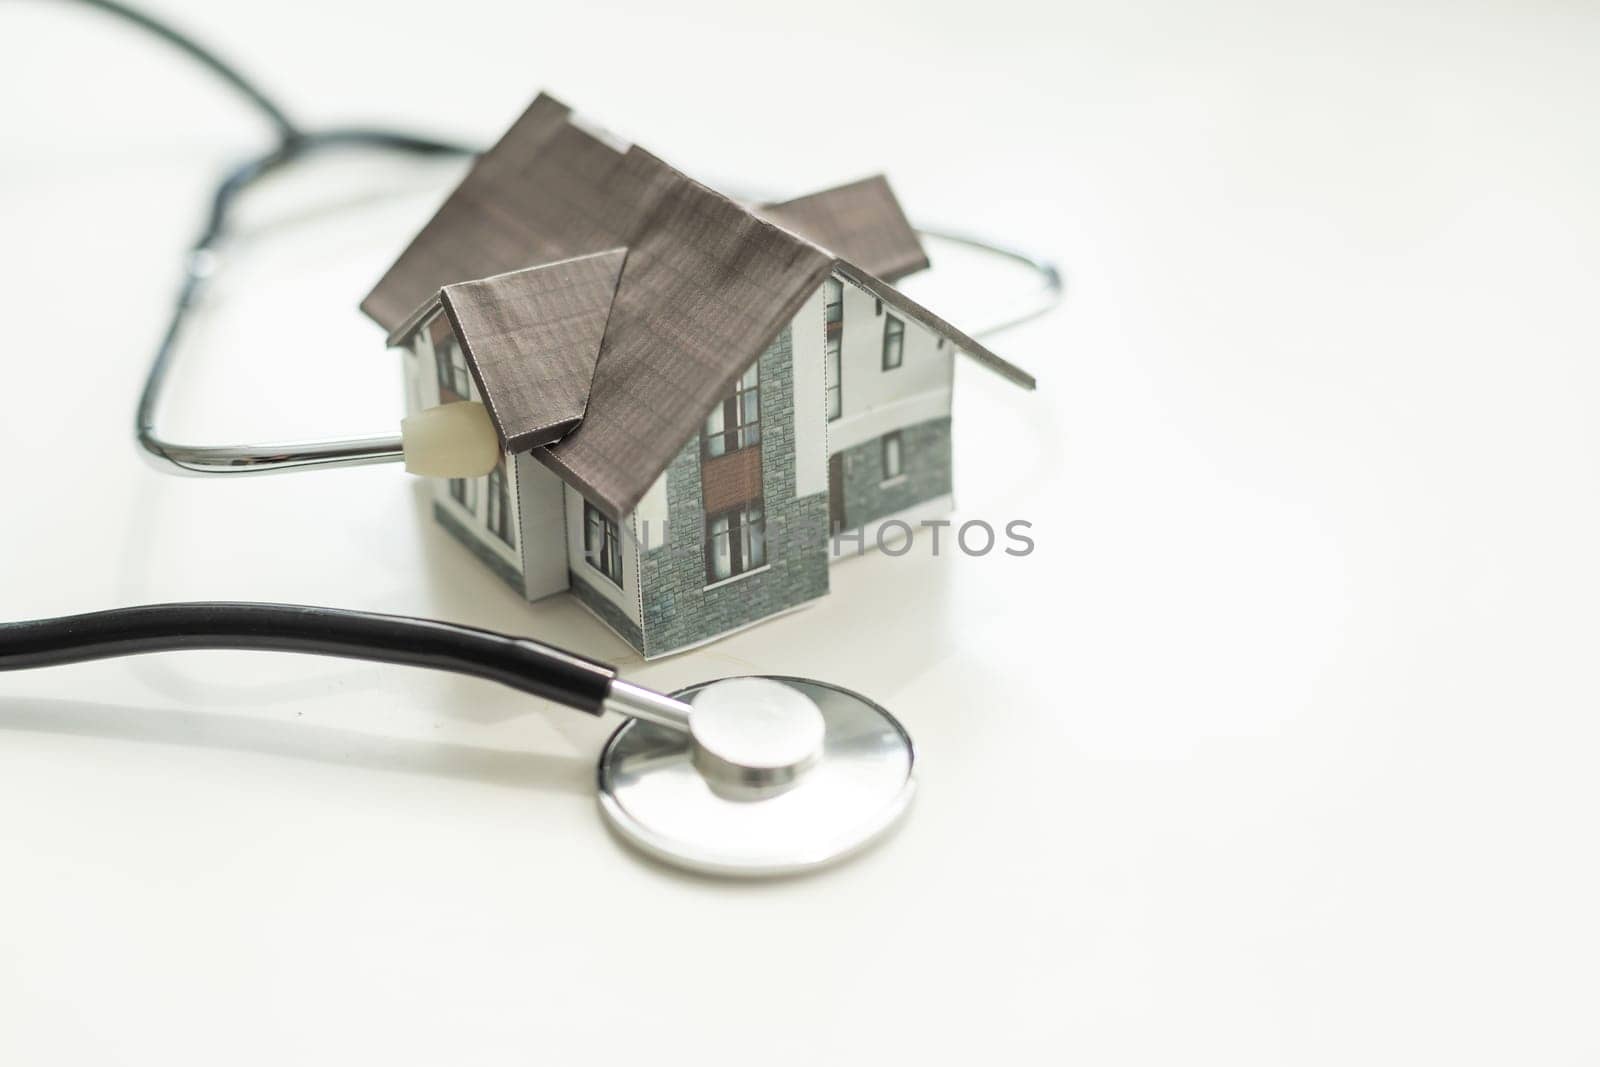 House and Stethoscope isolated on white background. High quality photo